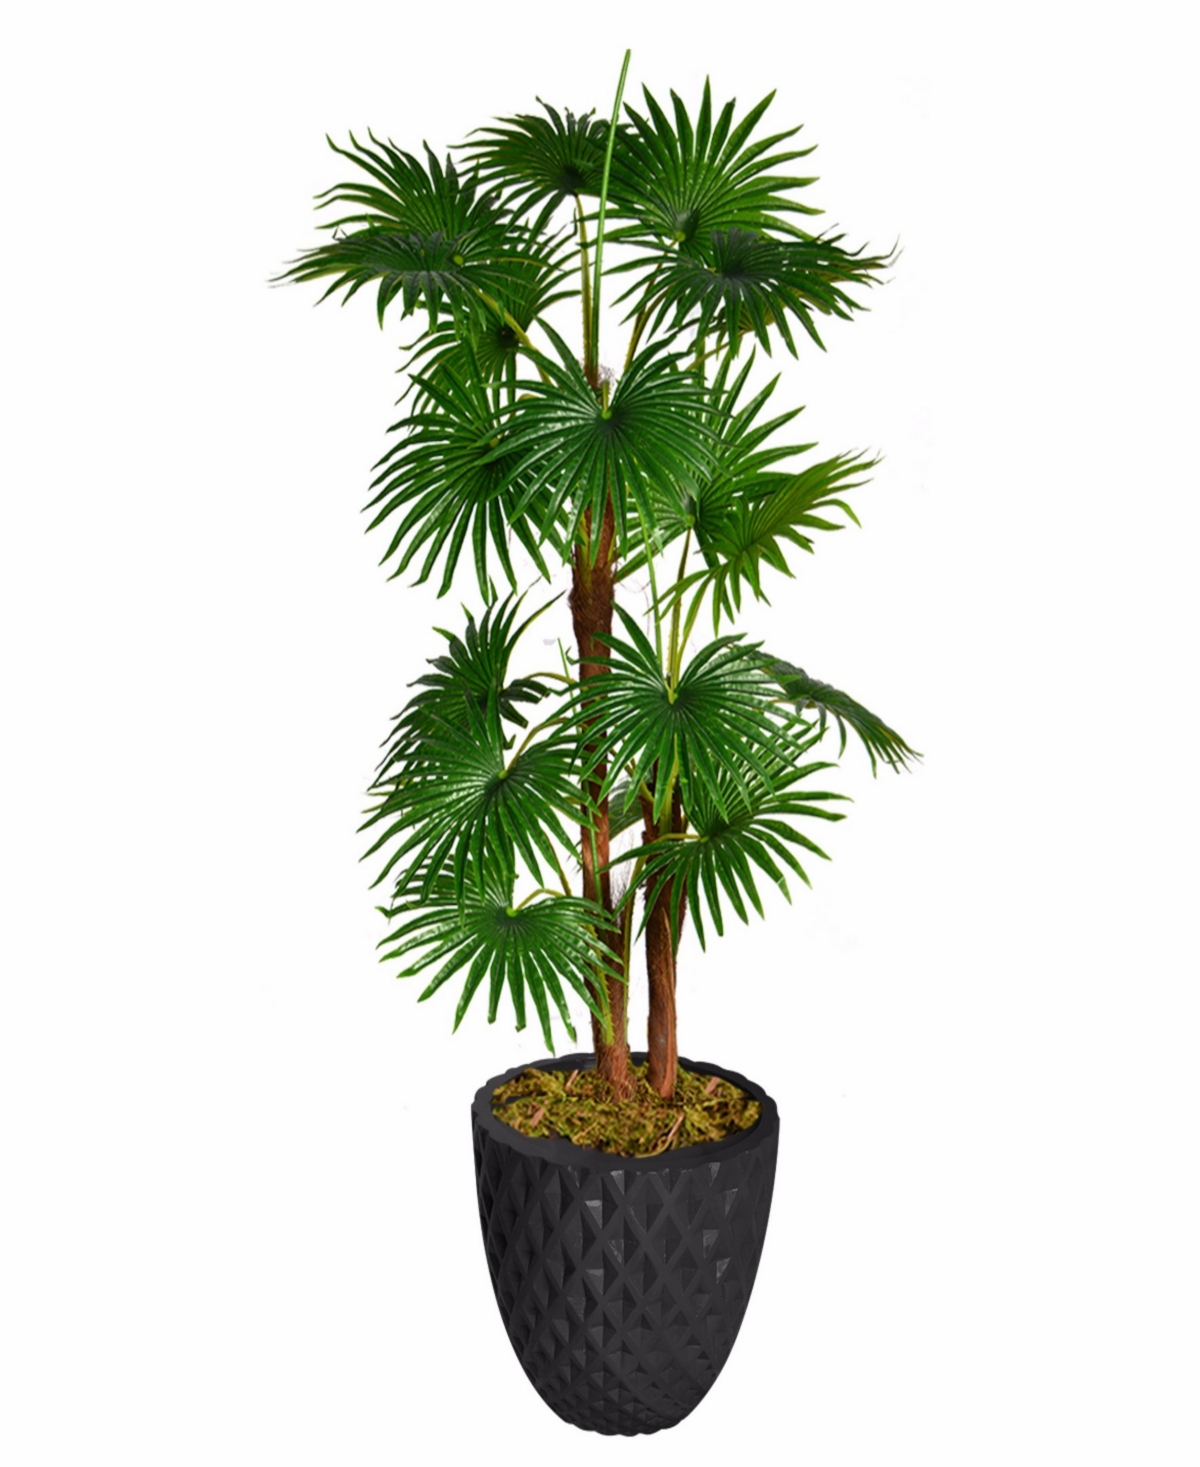 Artificial Faux Real Touch 54" Tall Fan Palm Tree With Faux Burlap Kit And 13.6" Black Honeycomb Fiberstone Planter - Assorted